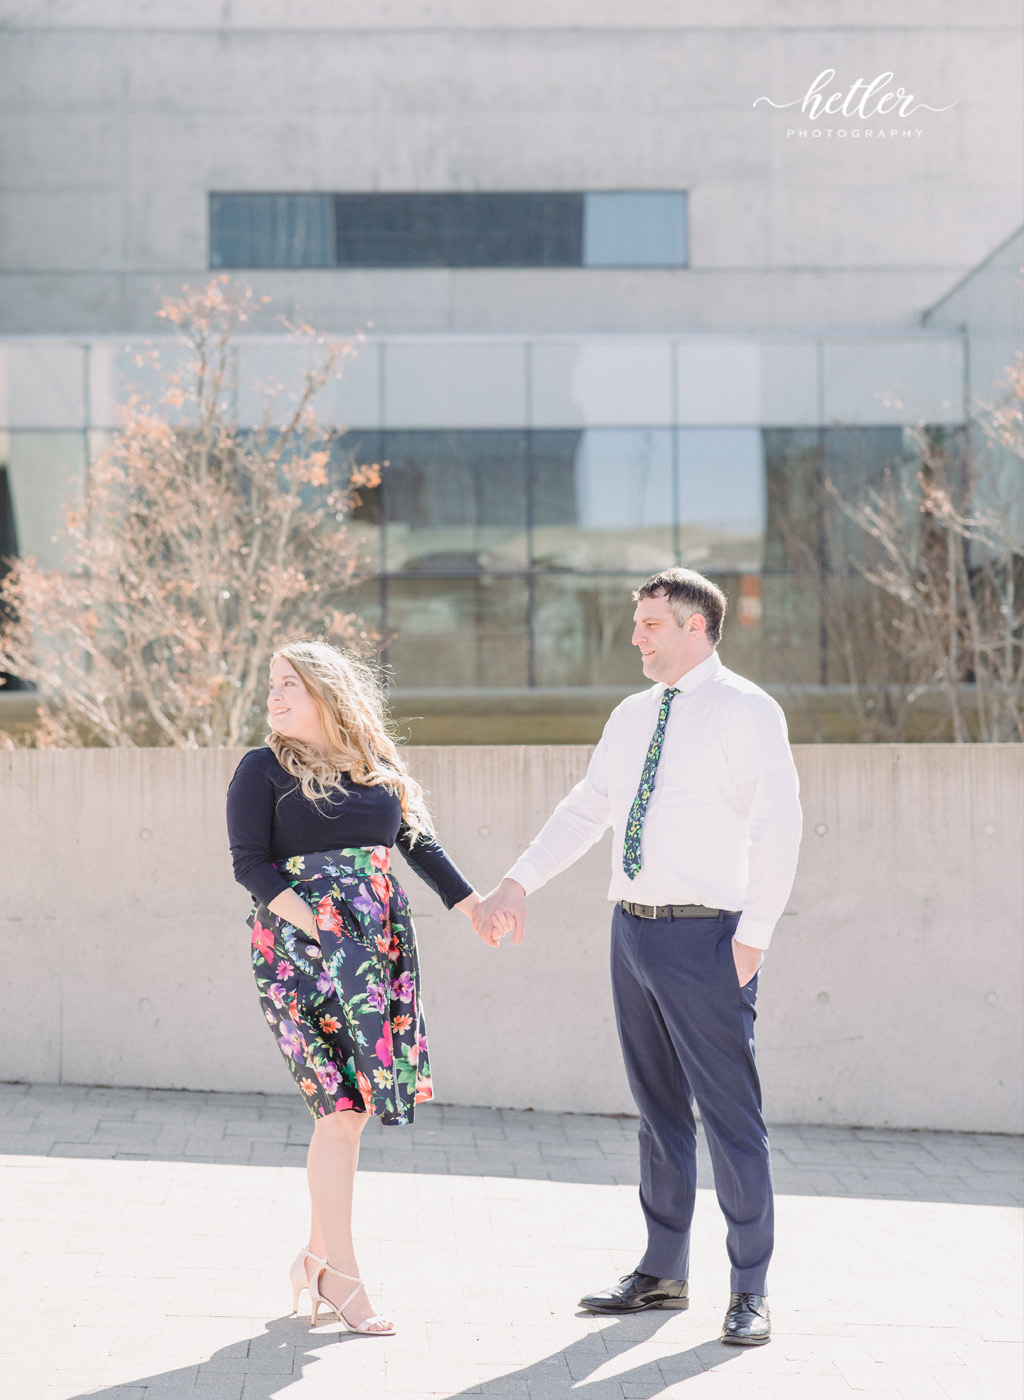 Downtown Grand Rapids engagement photos in winter